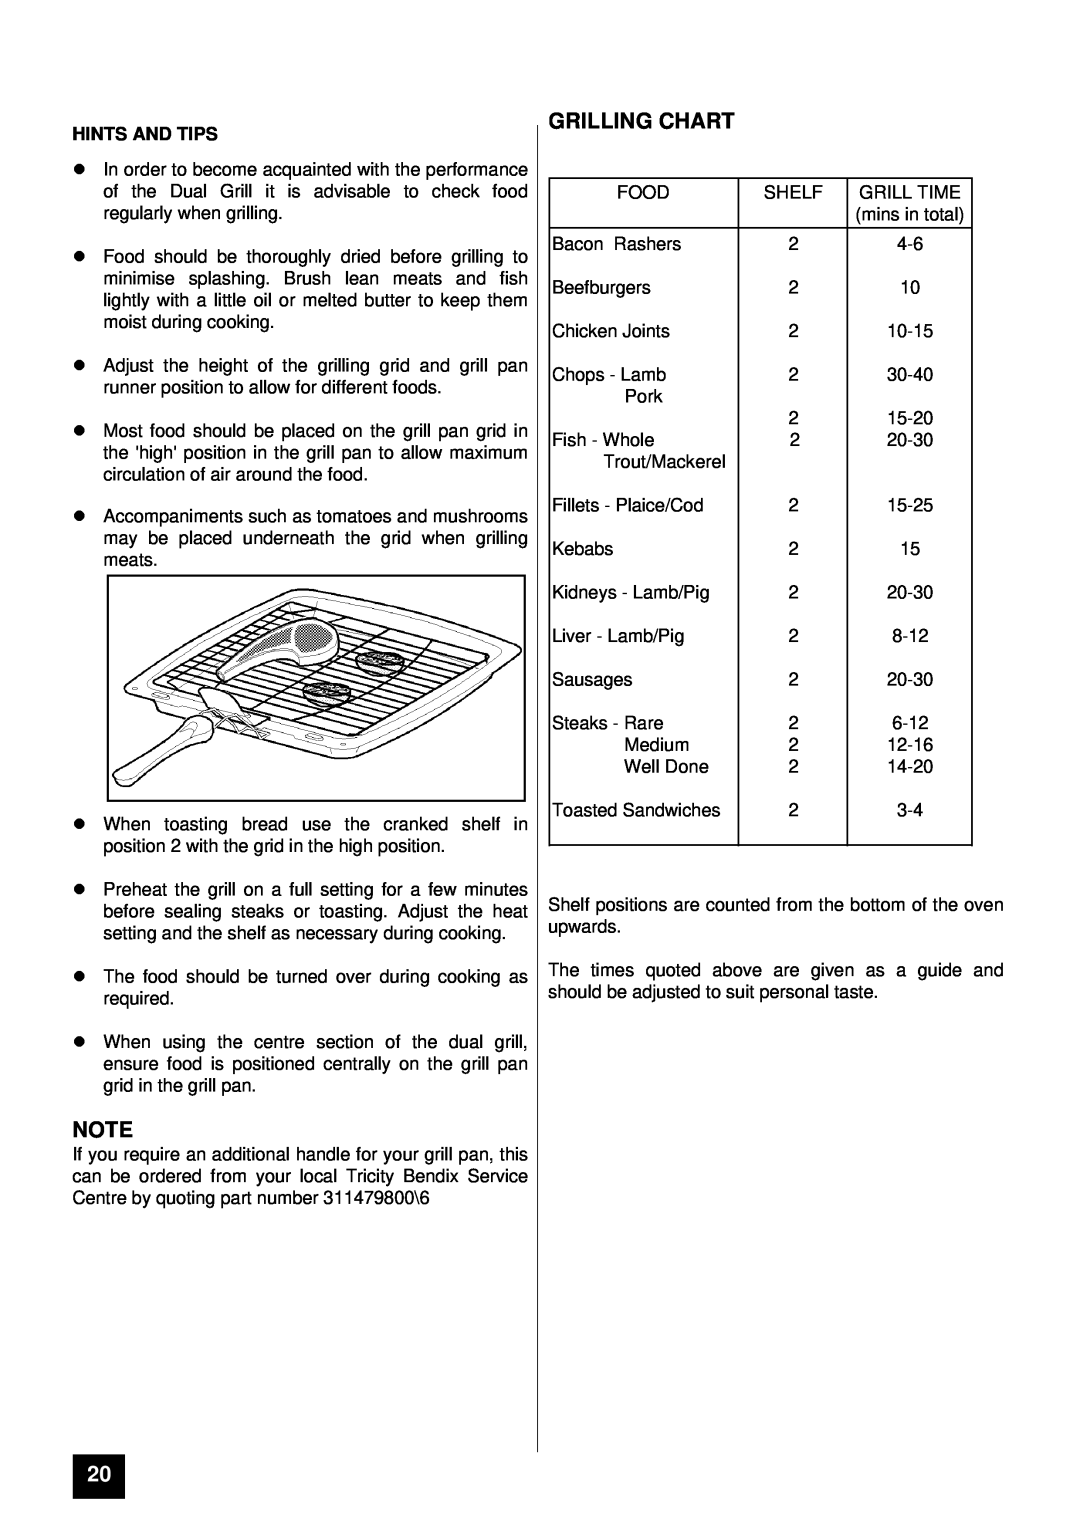 Tricity Bendix TBD903 installation instructions Grilling Chart, Hints And Tips 